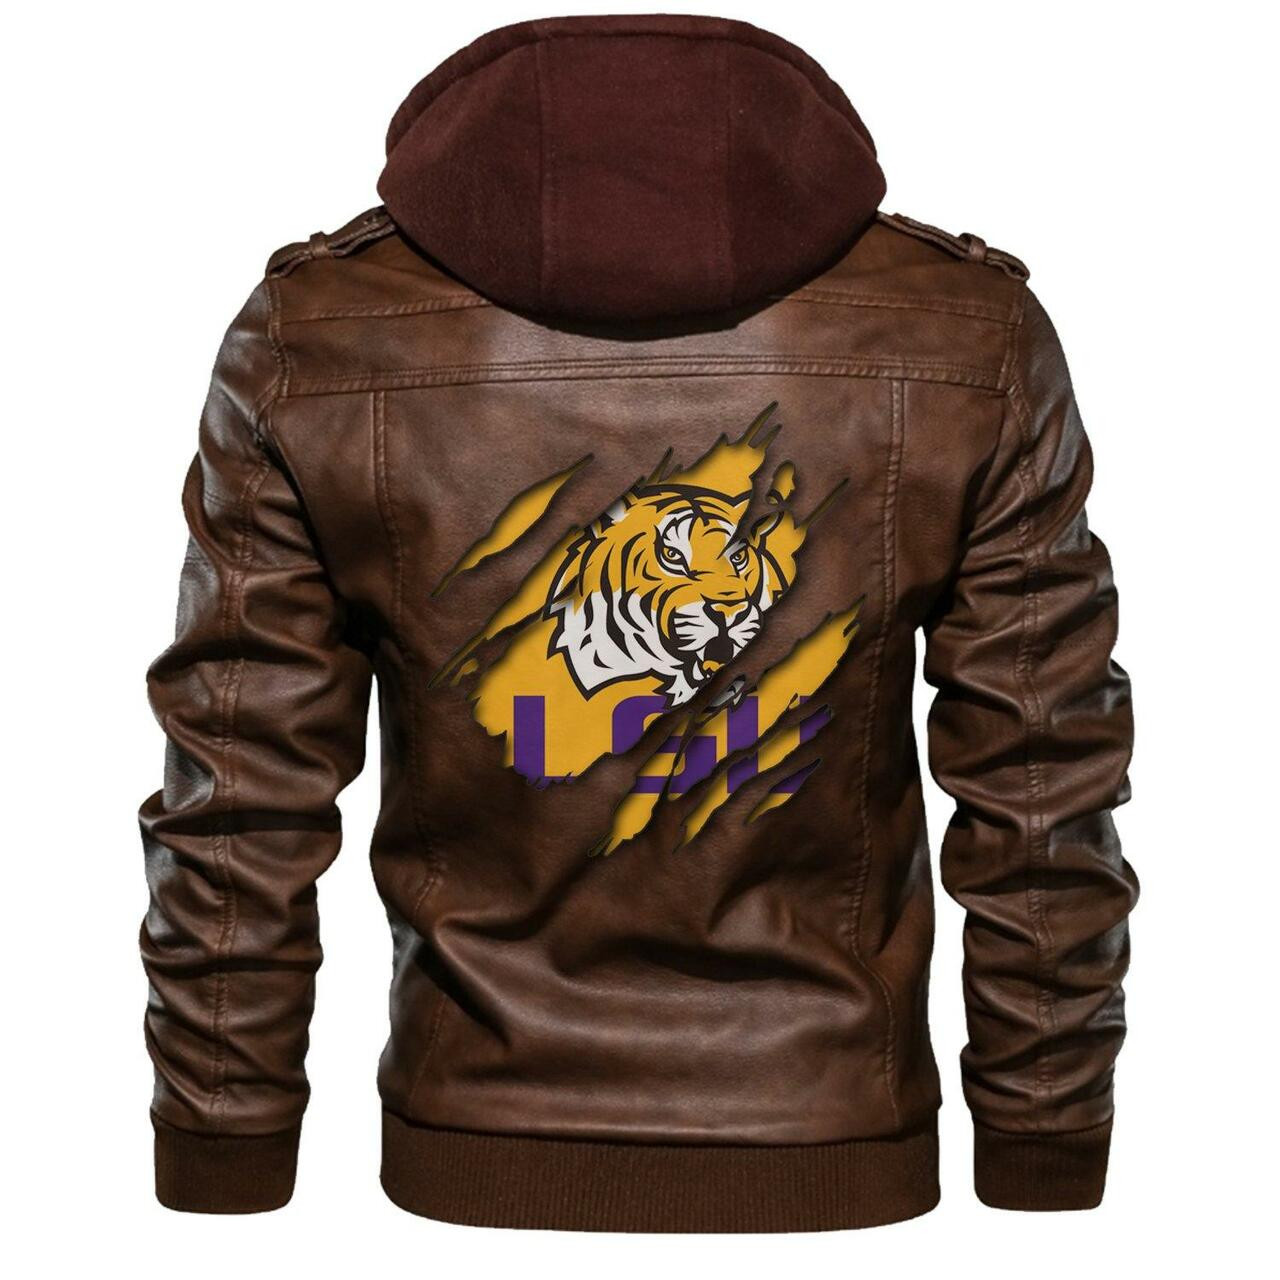 This leather Jacket will look great on you and make you stand out from the crowd 27